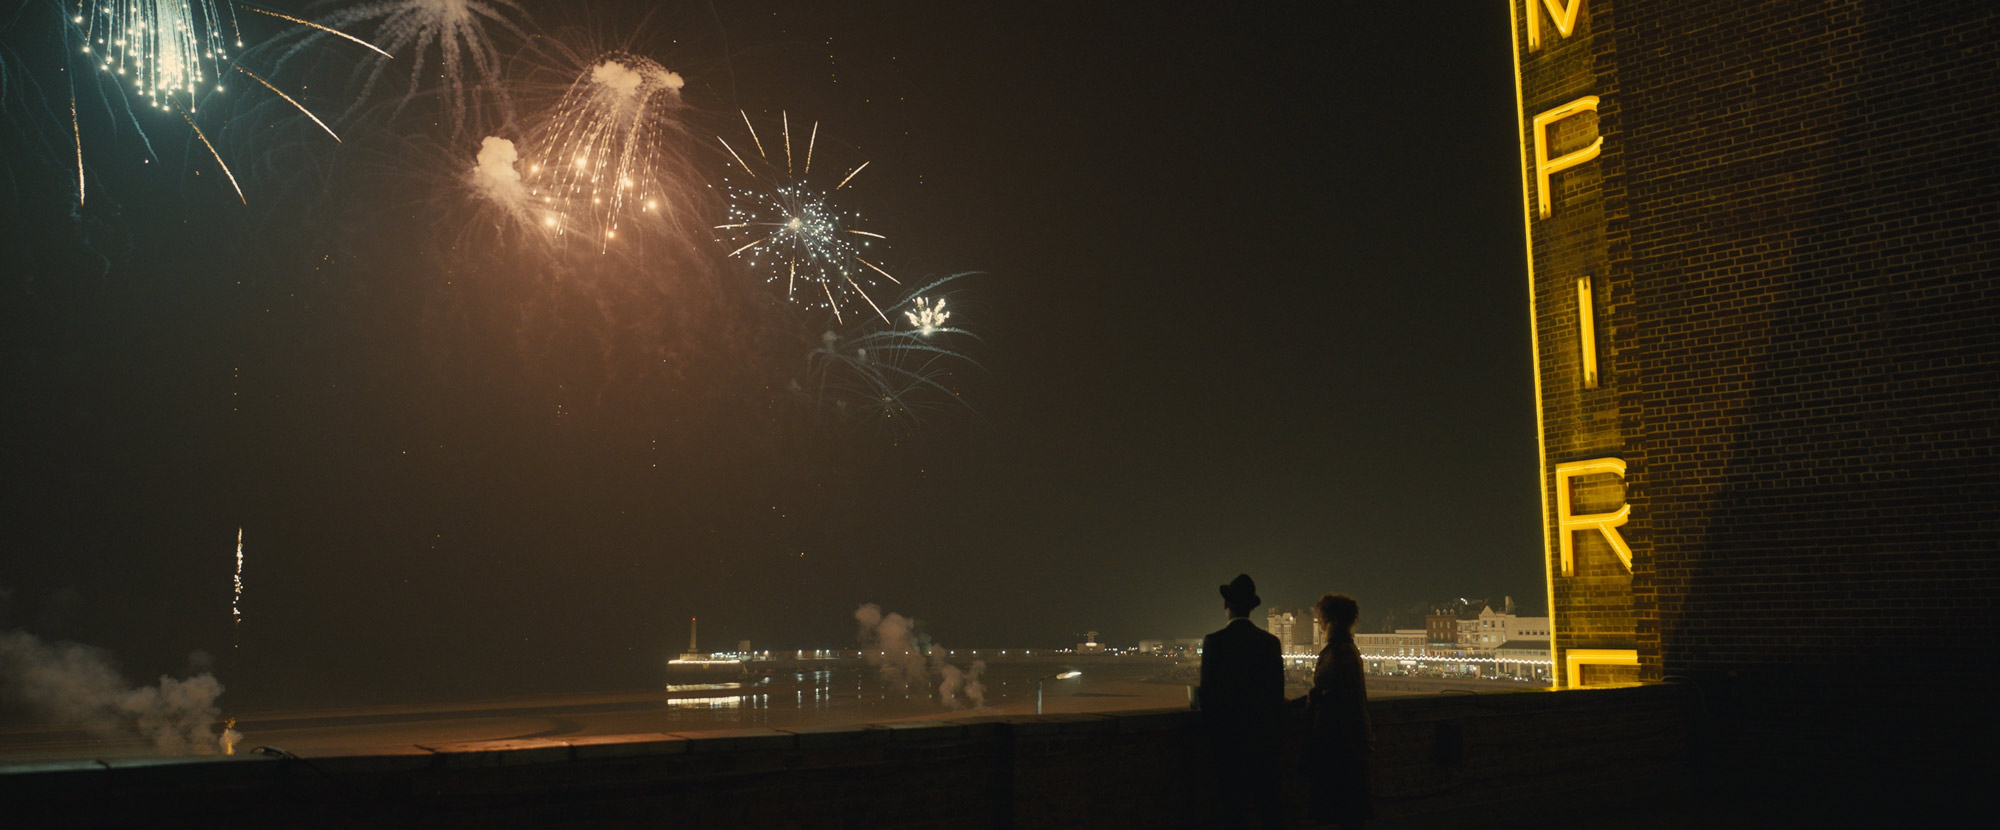 Two people watch fireworks over a body of water